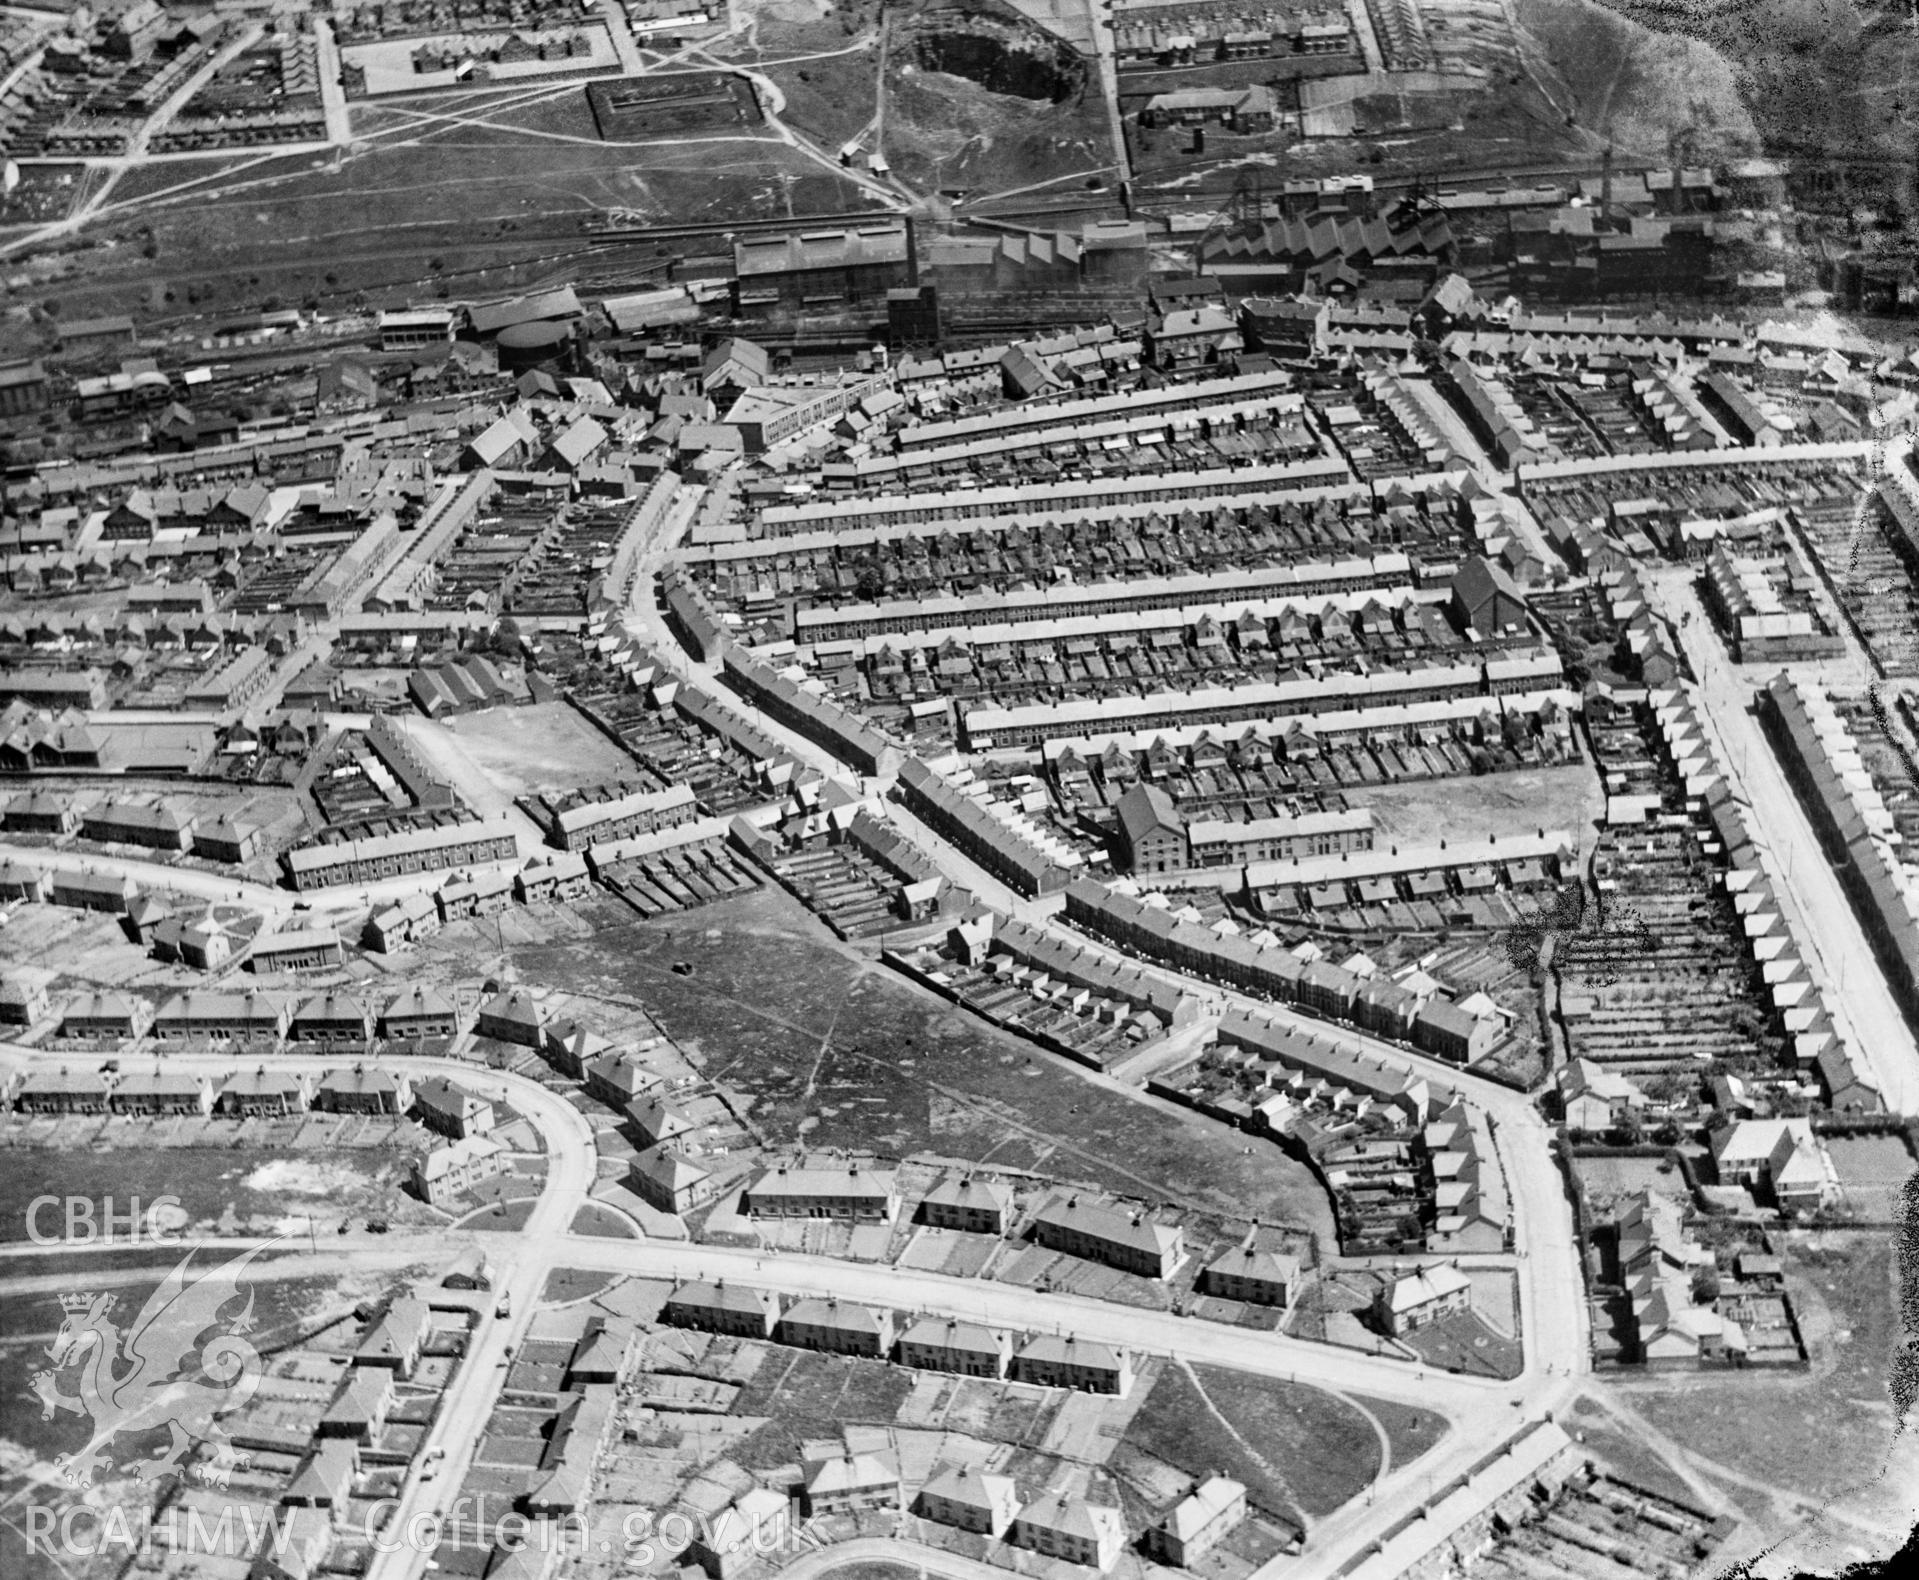 View of new housing at Aberbargoed, oblique aerial view. 5?x4? black and white glass plate negative.